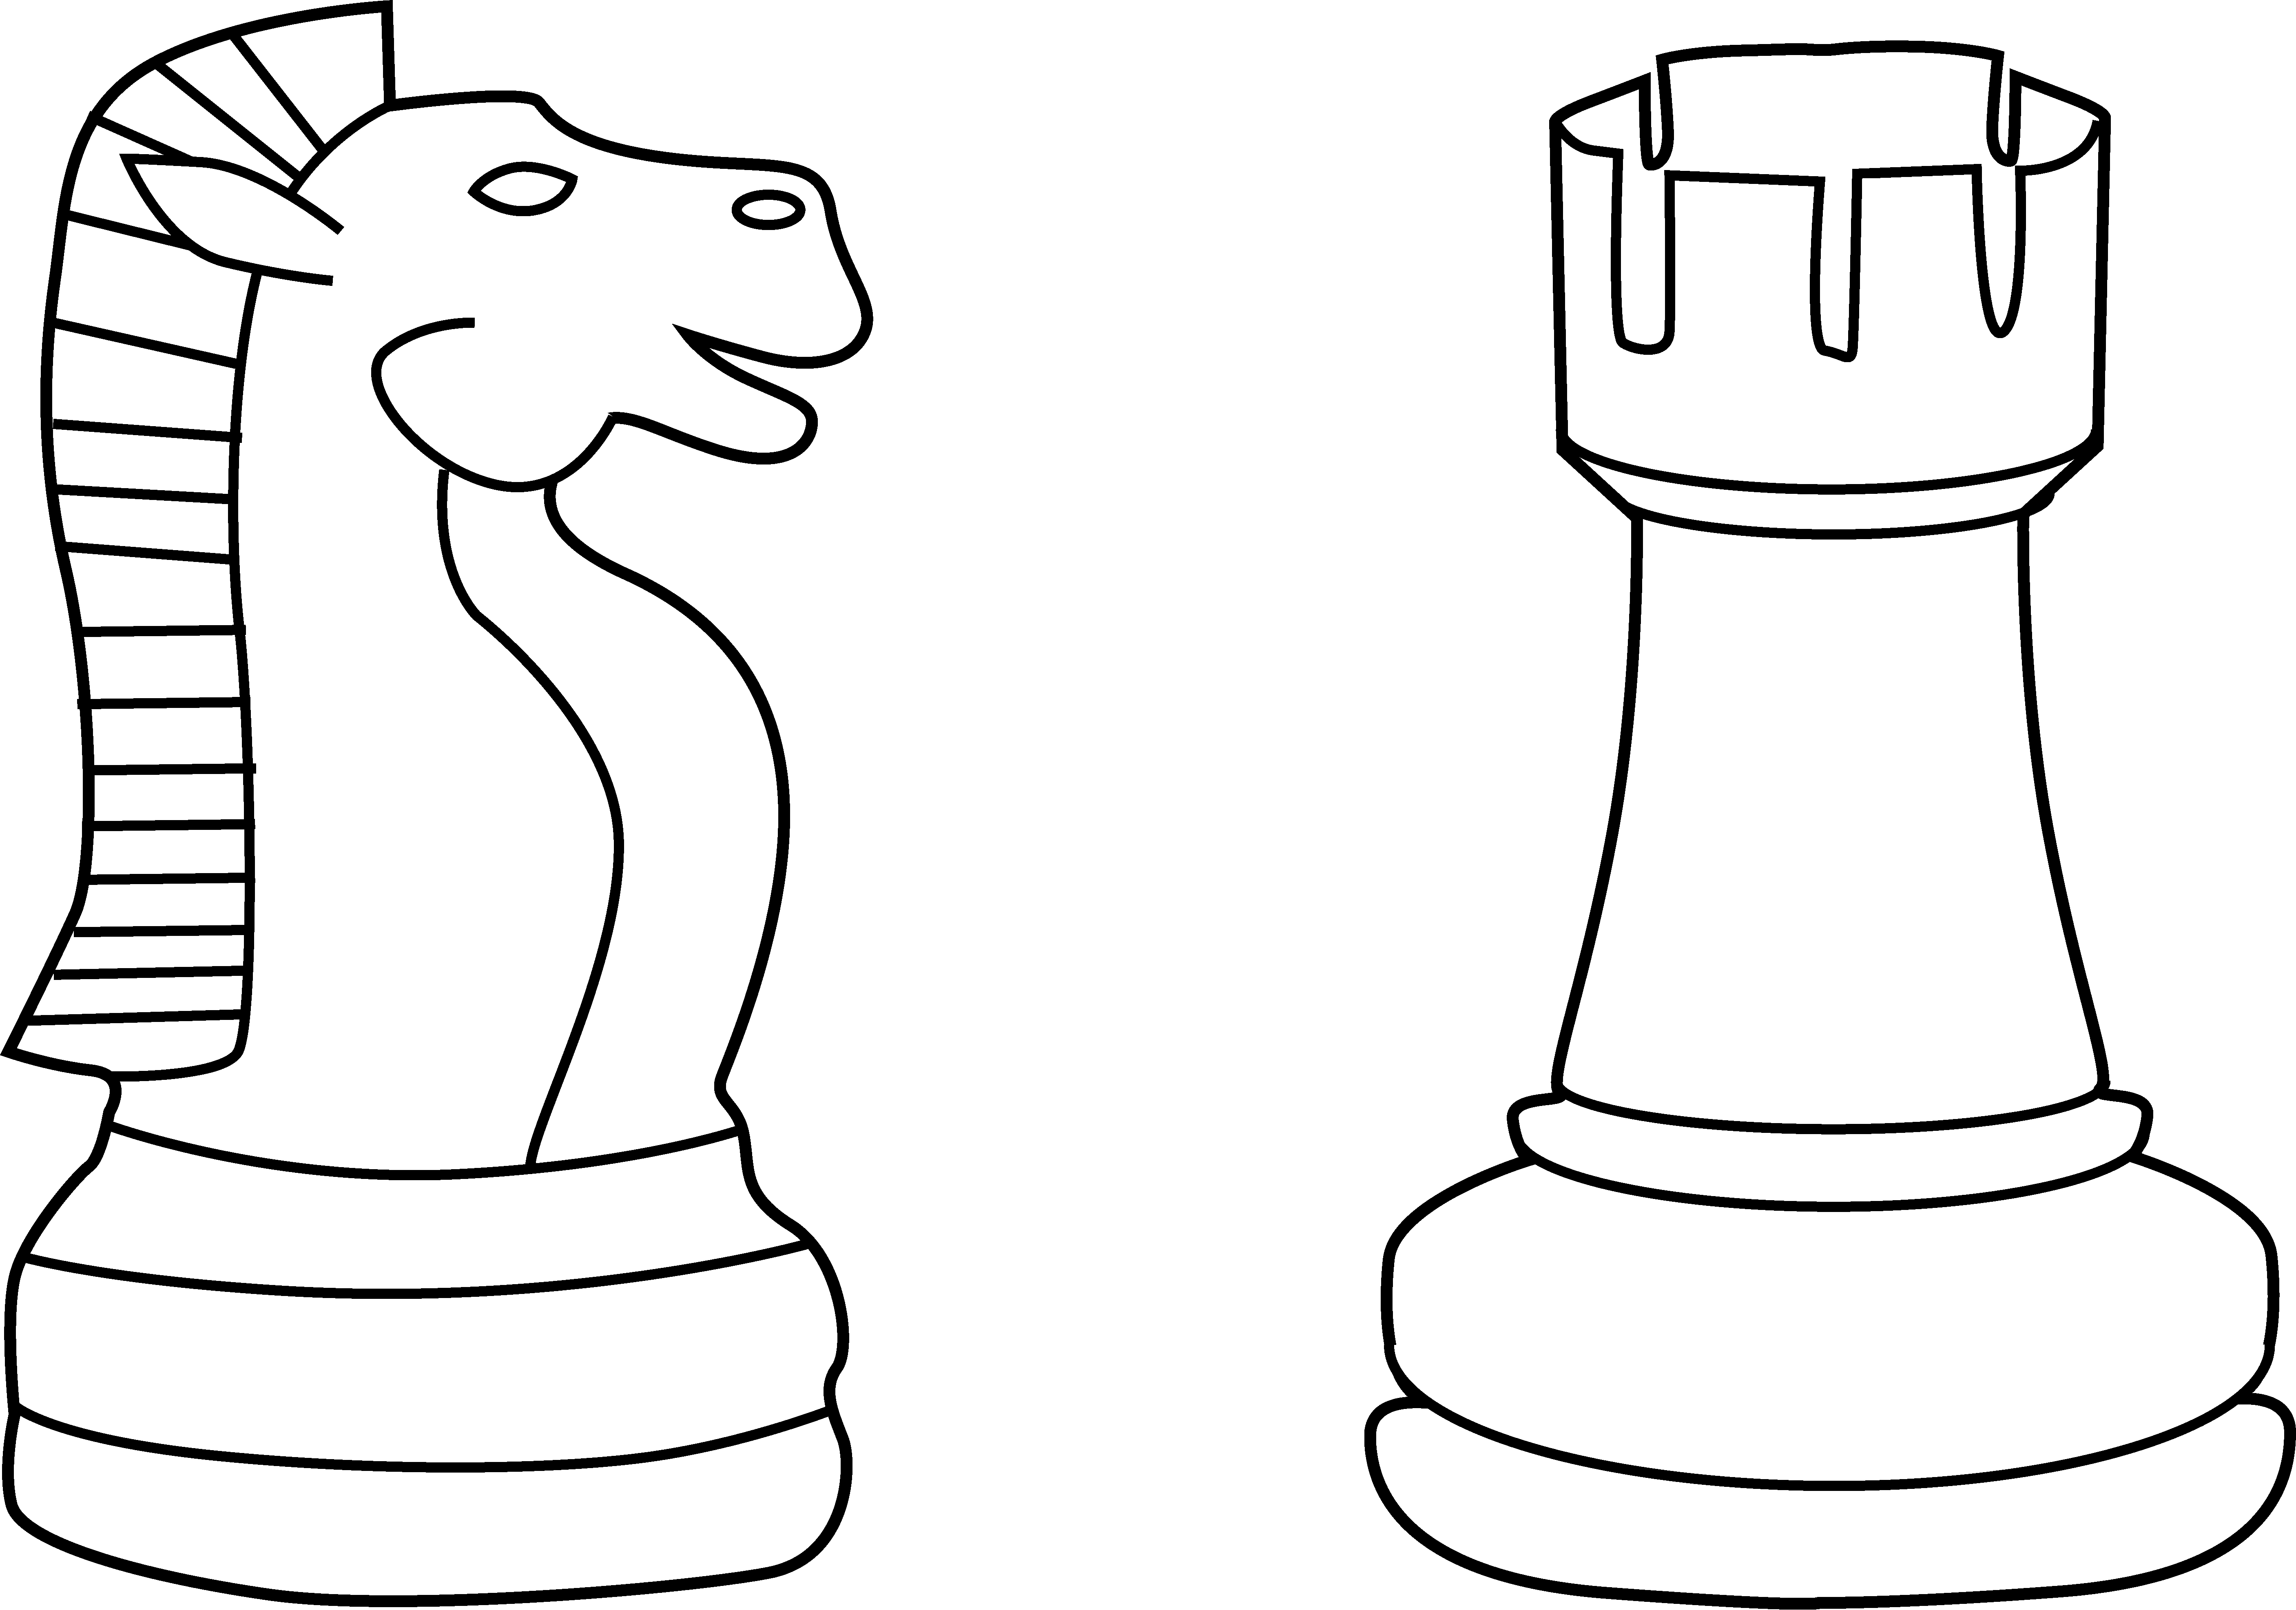 Chess Piece Images